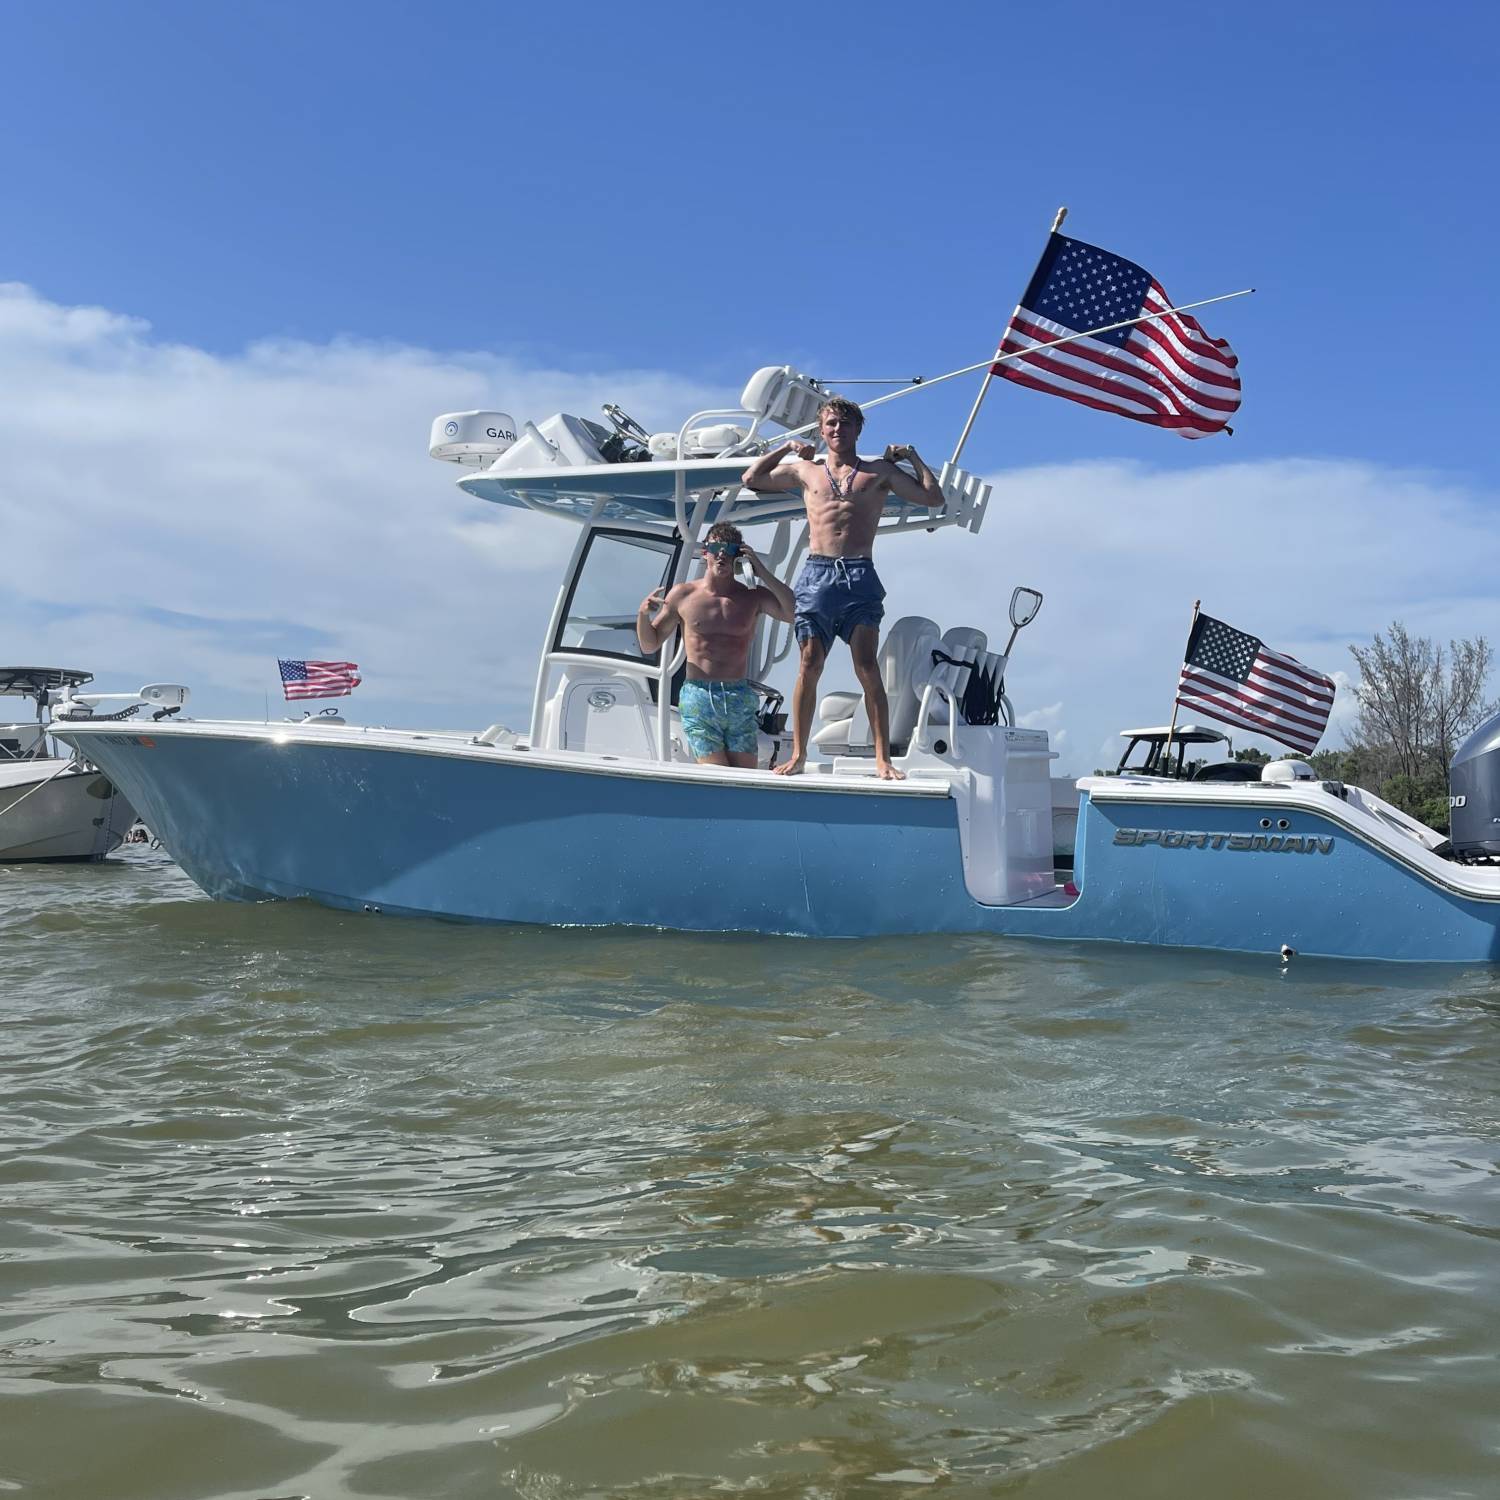 Title: 4th of July🇺🇸🇺🇸🇺🇸🇺🇸 - On board their Sportsman Open 282 Center Console - Location: Keywaden Island. Participating in the Photo Contest #SportsmanOctober2021